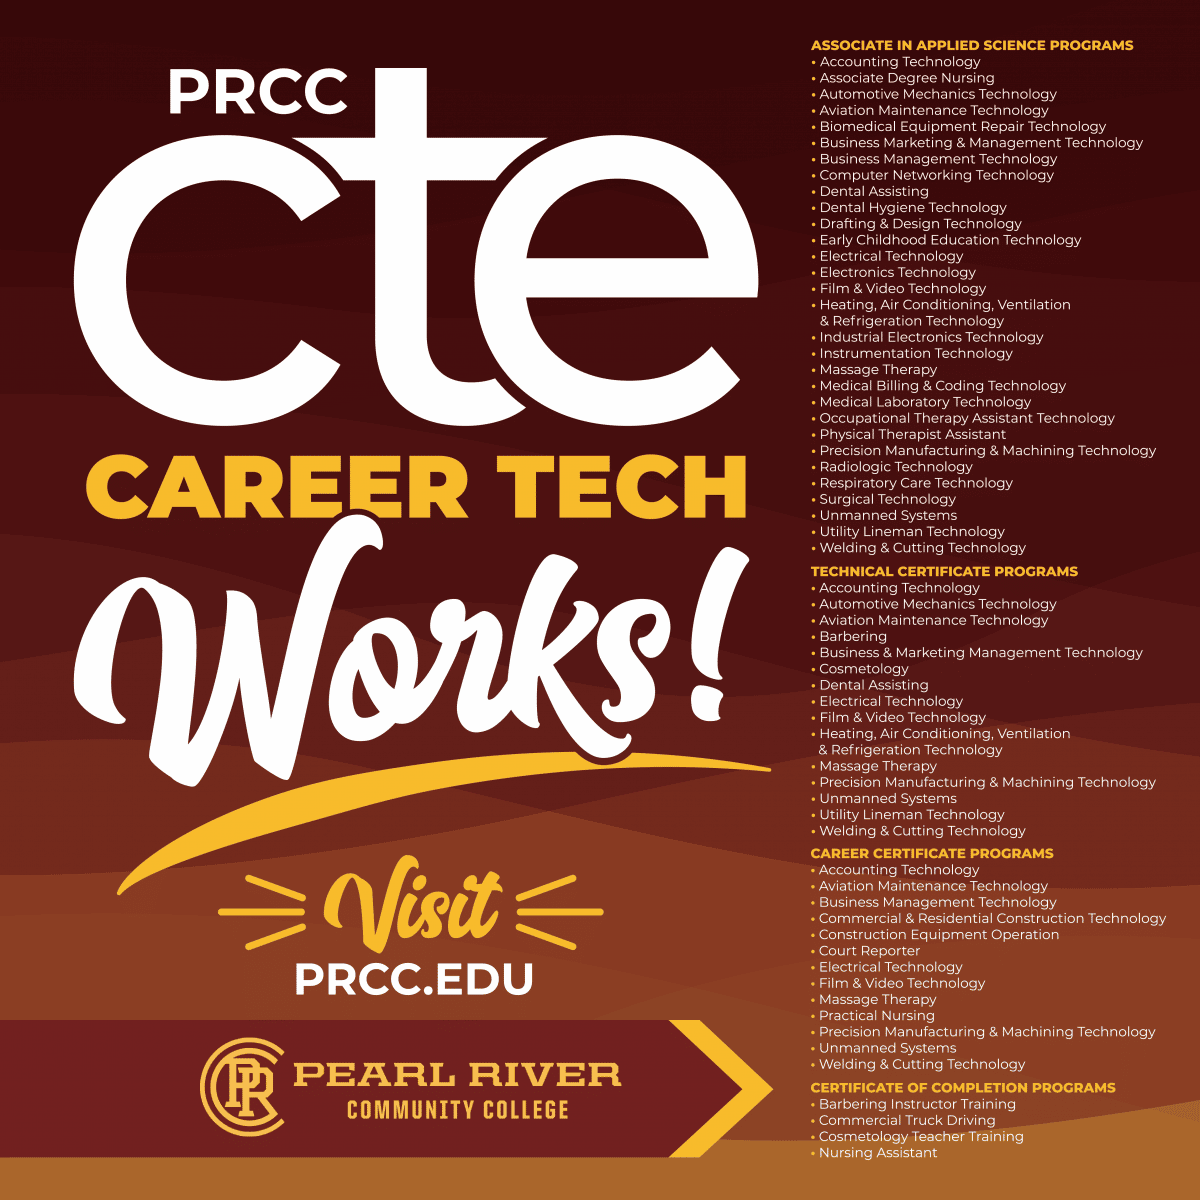 PRCC Career Tech Works list of available programs